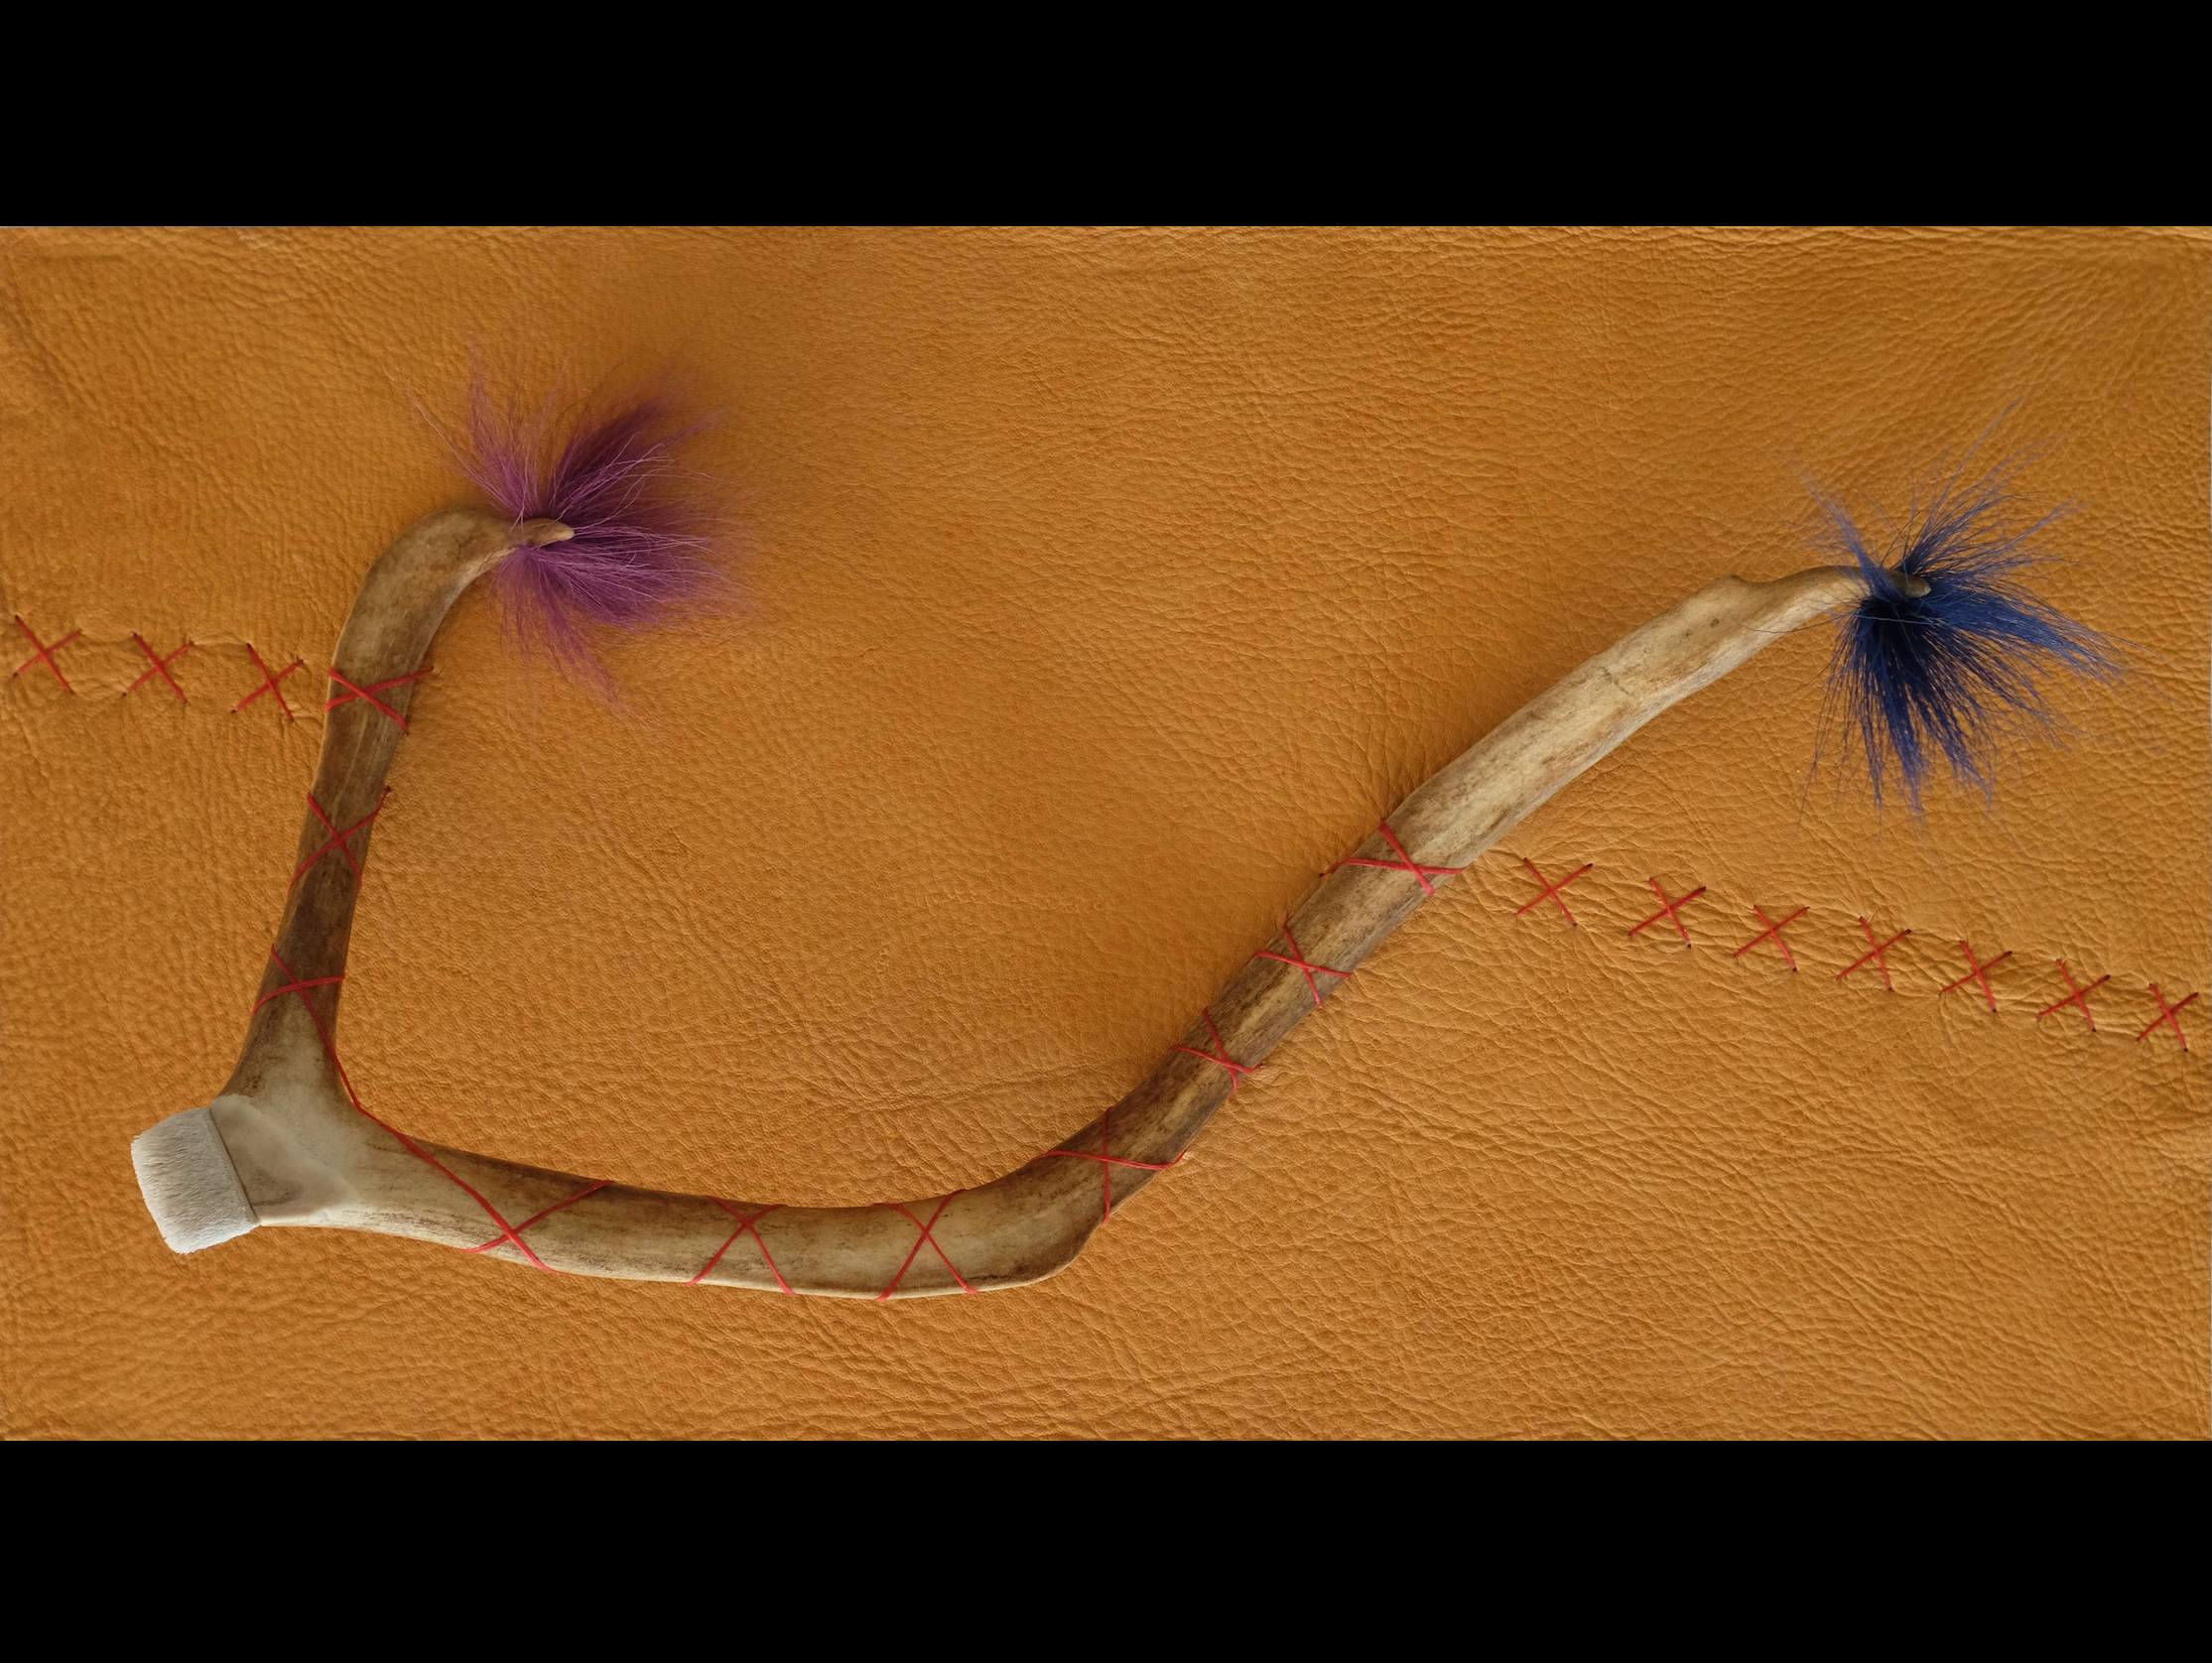   Traces, 2014, caribou antler, caribou hair, and sinew on elk hide,&nbsp;  11" x 20" x 5"  